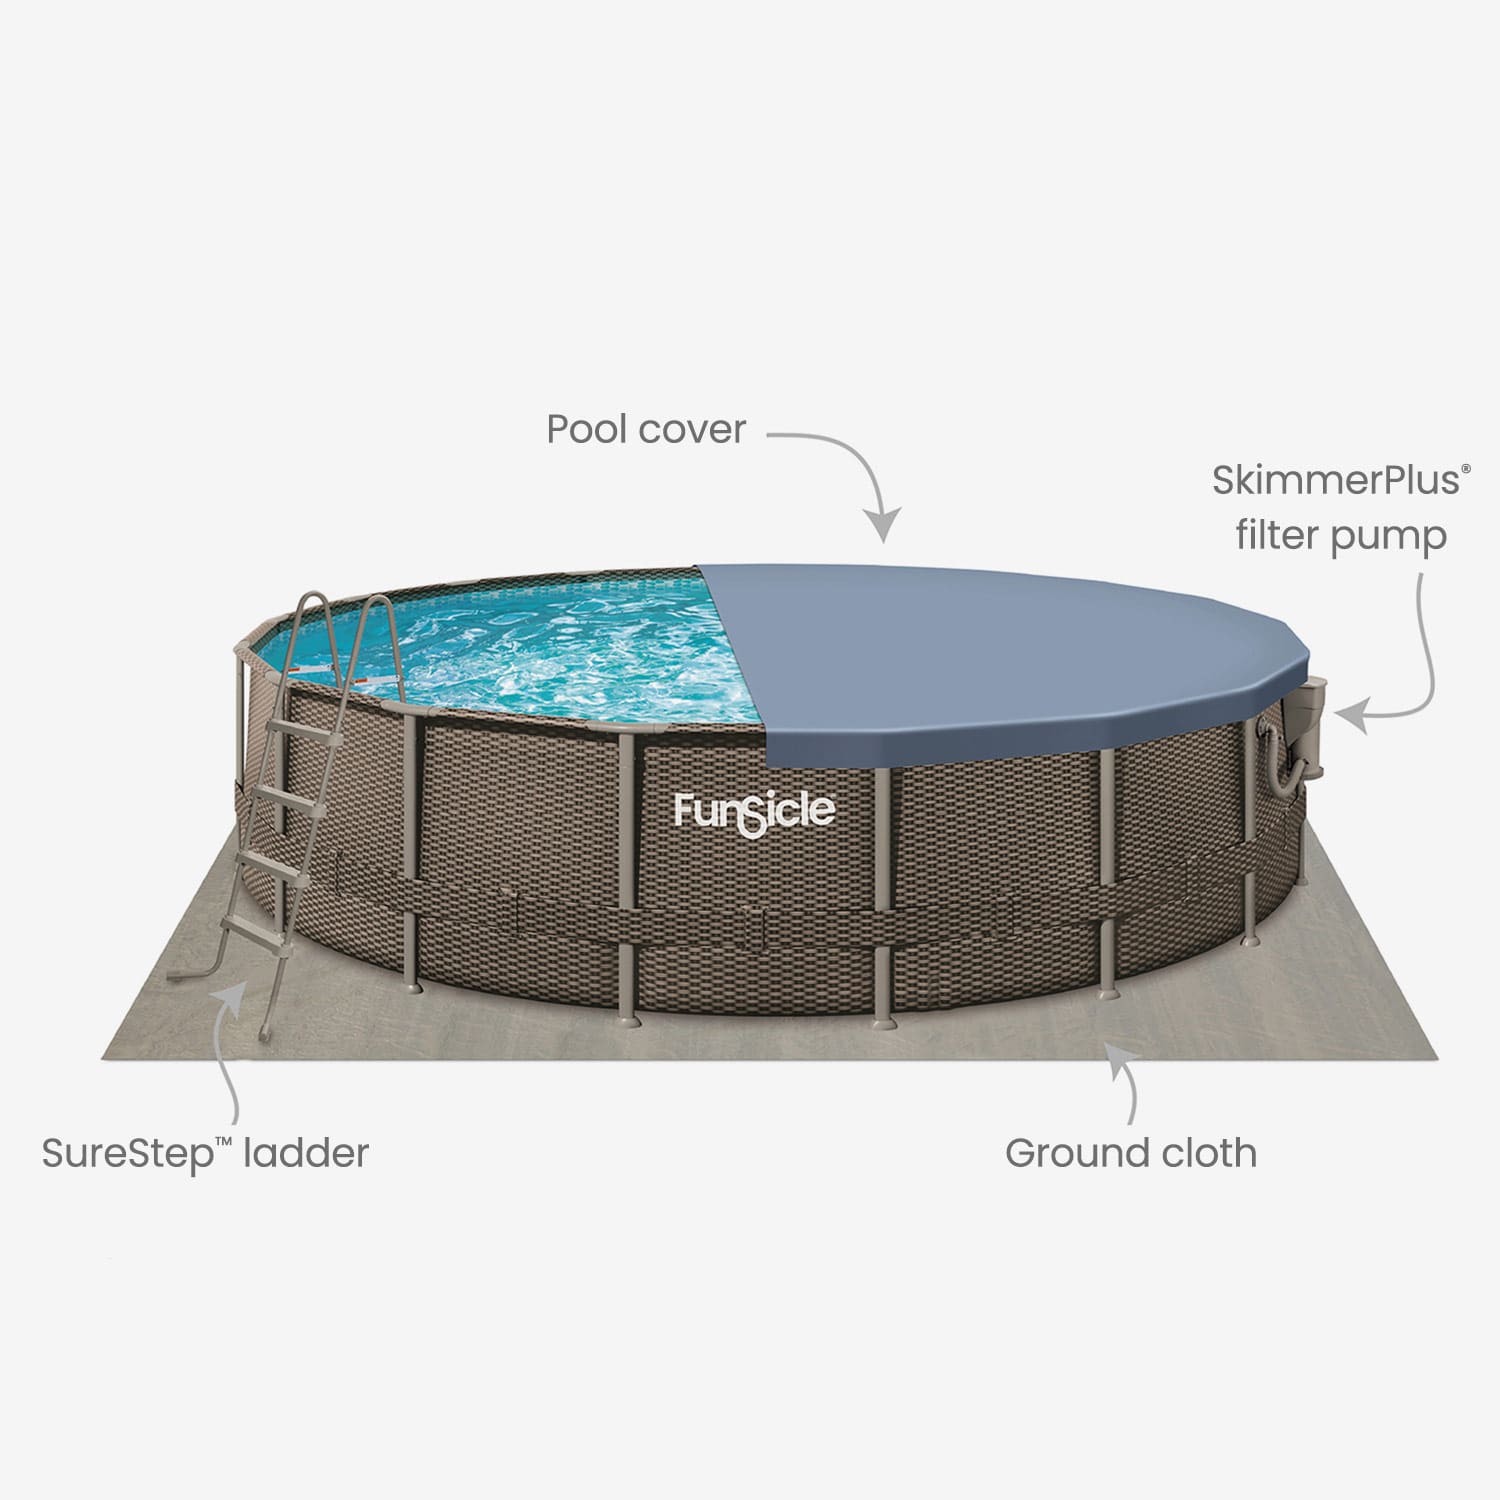 Funsicle 18 ft Oasis Designer Pool - Dark Double Rattan with callout features